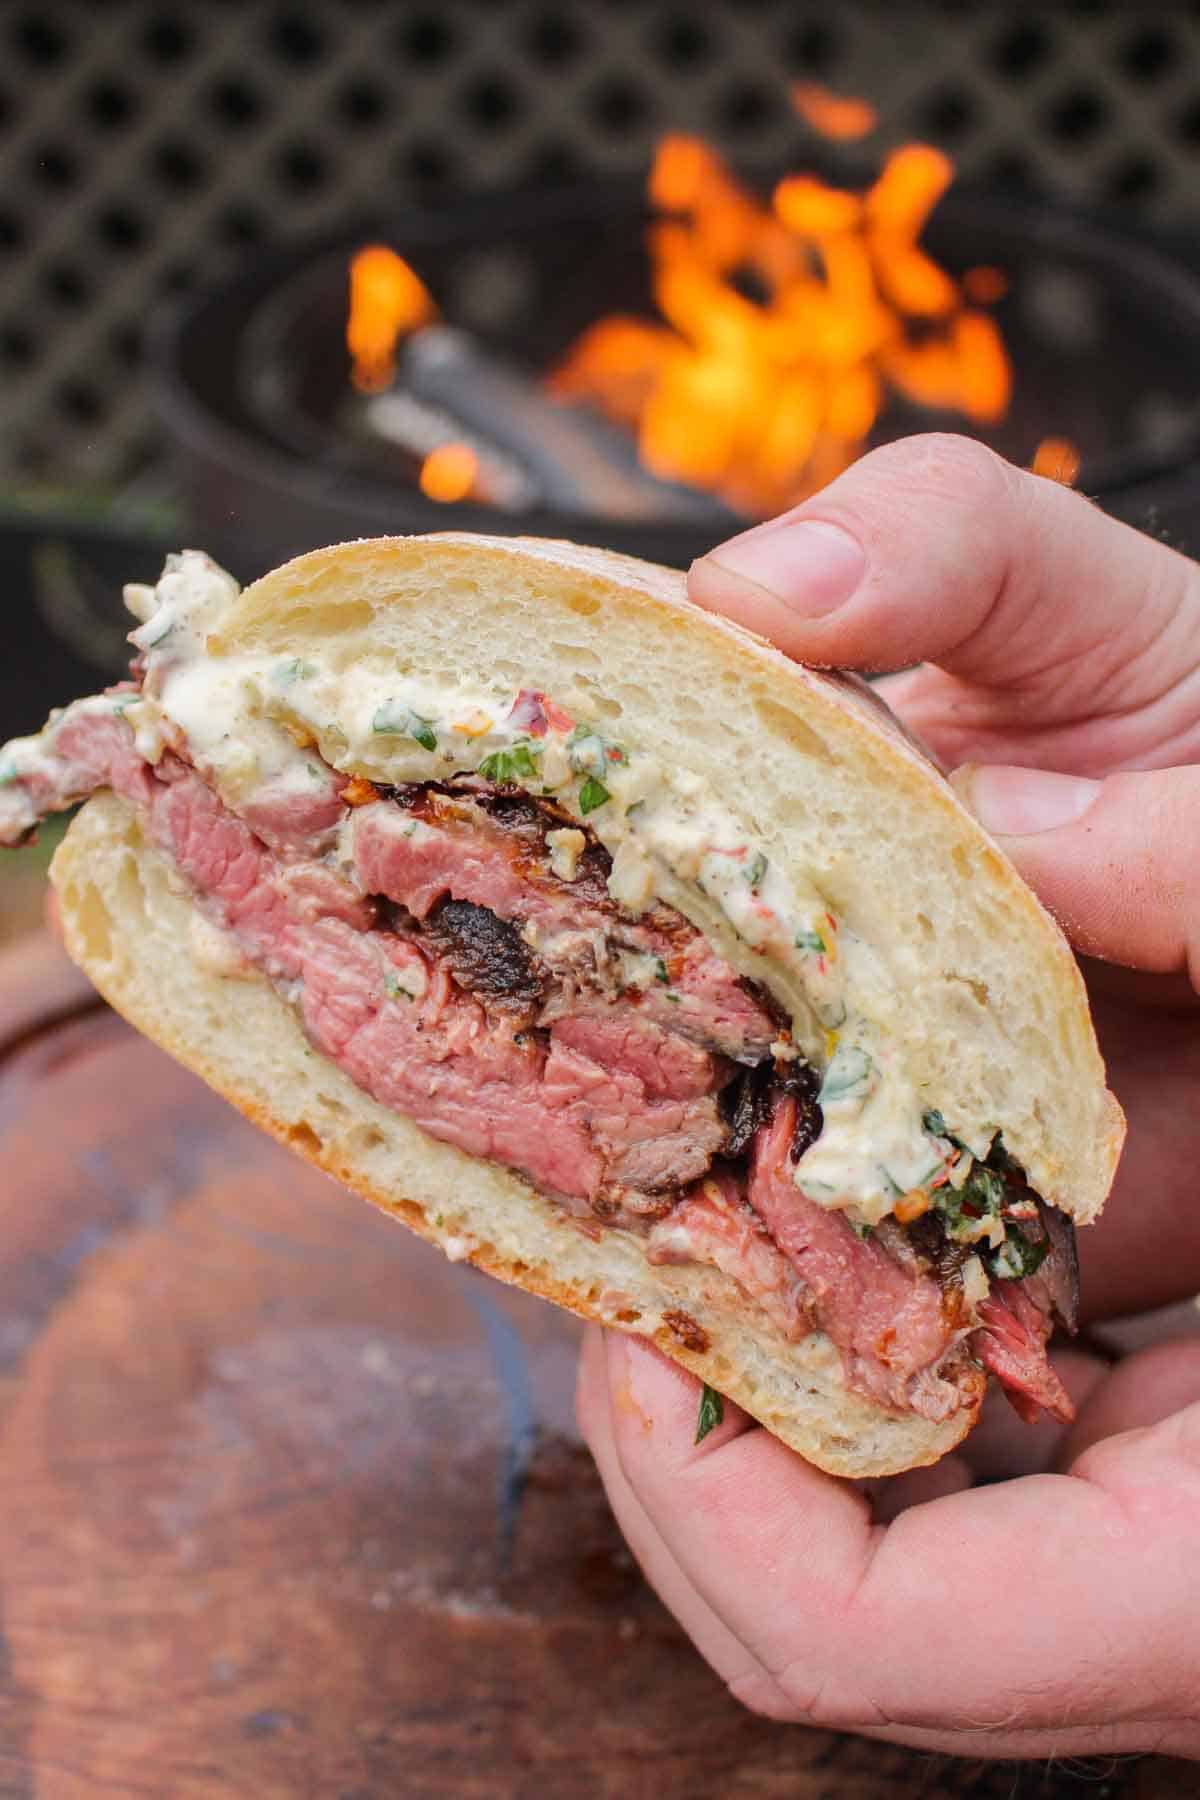 Chimichurri Steak Sandwich being held close to the camera to show the assembly of the sandwich.